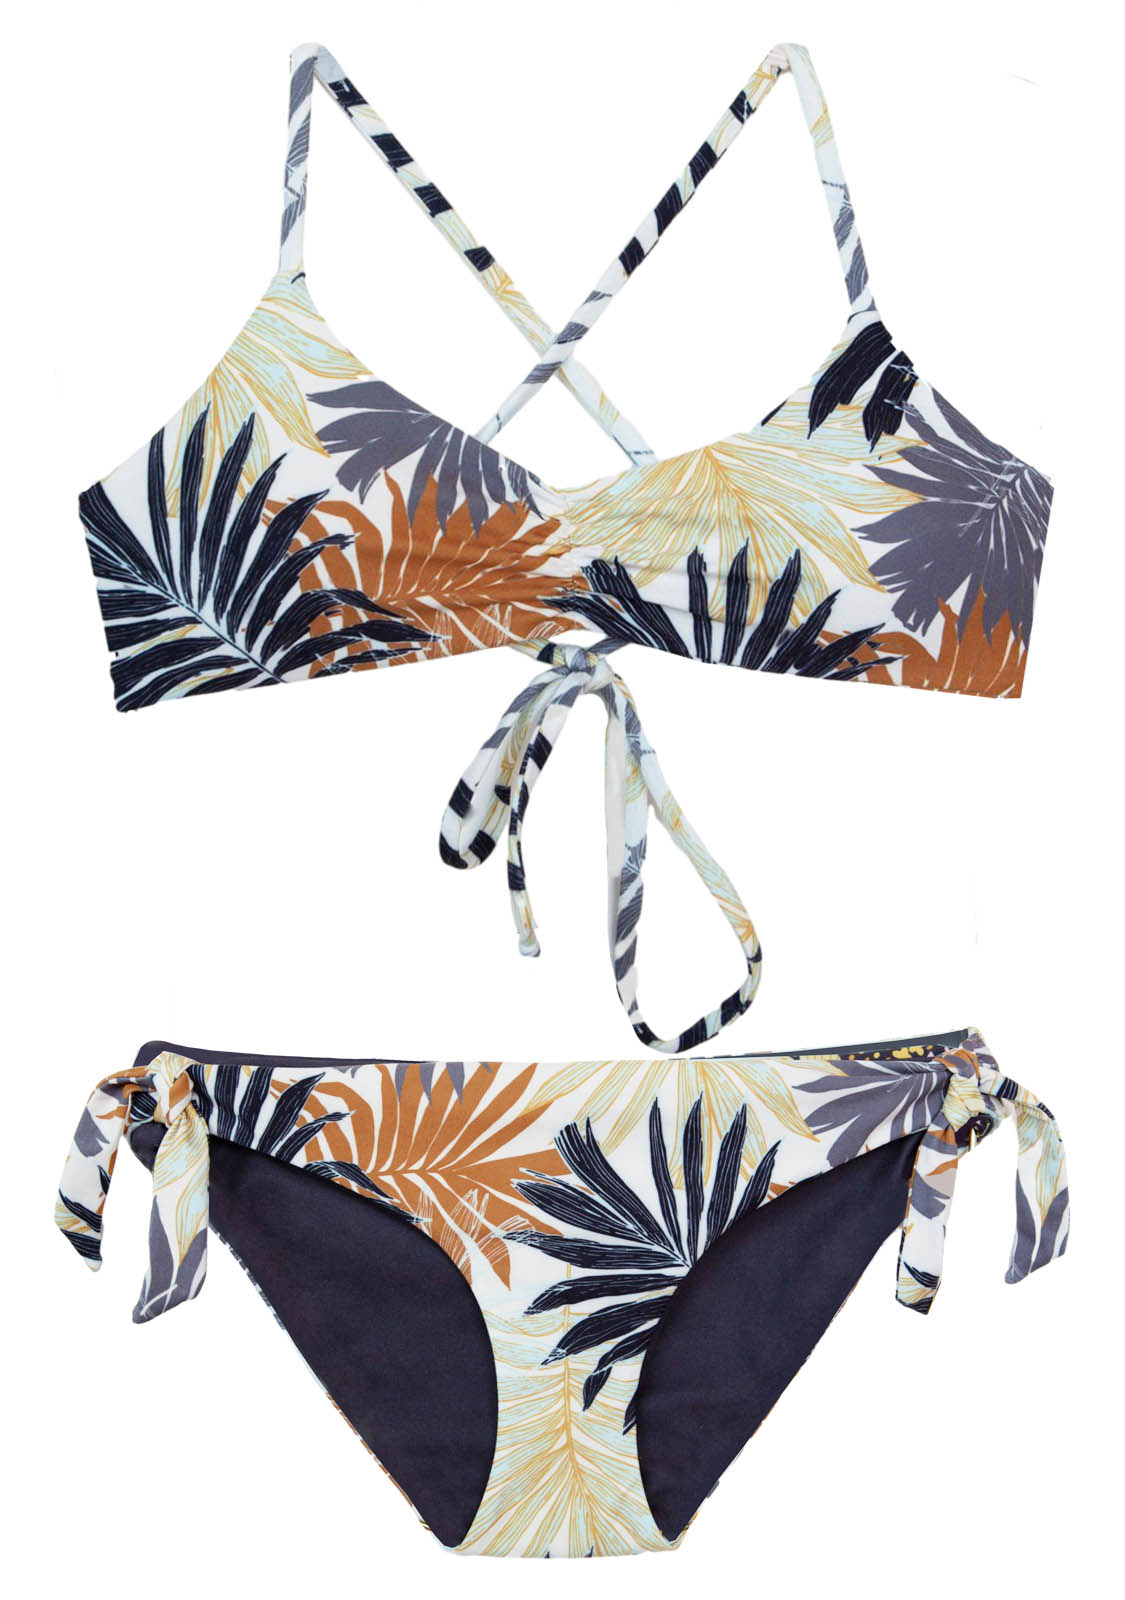 2-Piece bikini with tropical brown-blue-black print, Swimwear for Girls sizing ages 10-18